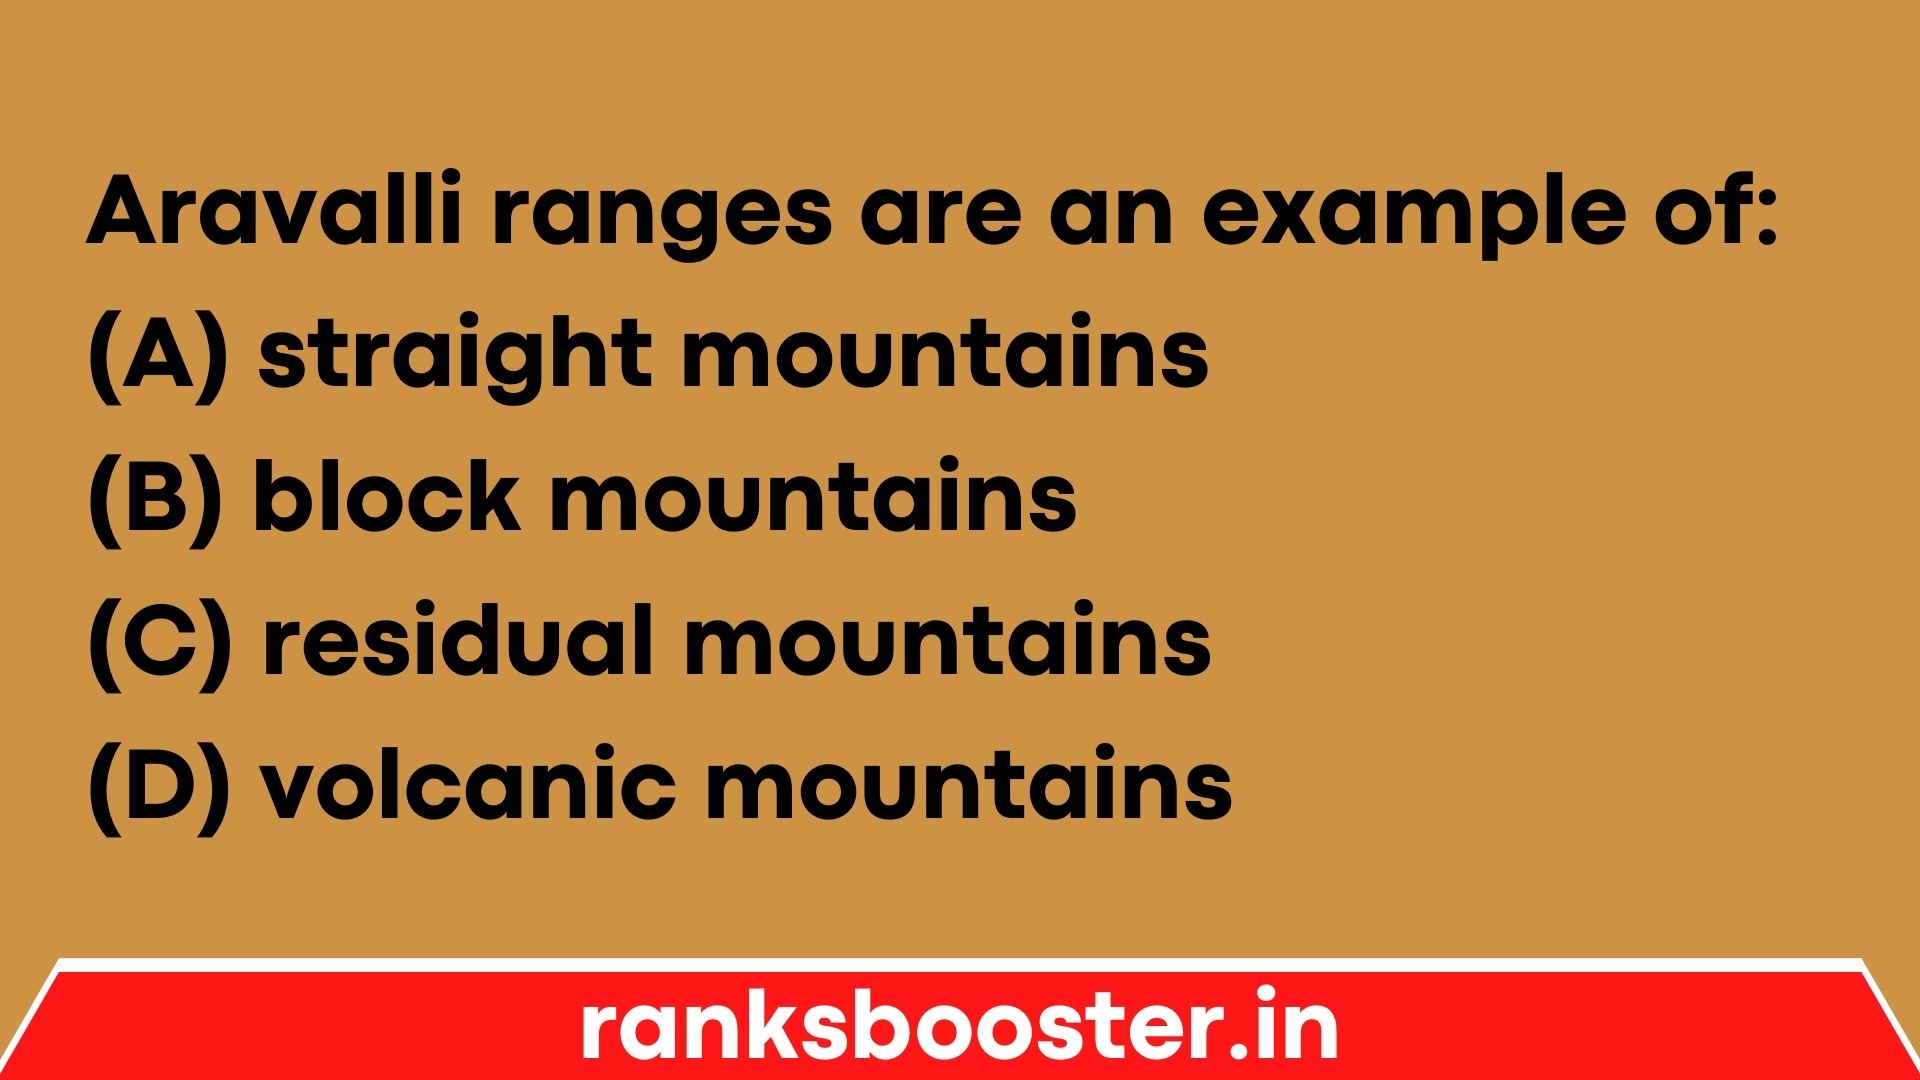 Aravalli ranges are an example of: (A) straight mountains (B) block mountains (C) residual mountains (D) volcanic mountains